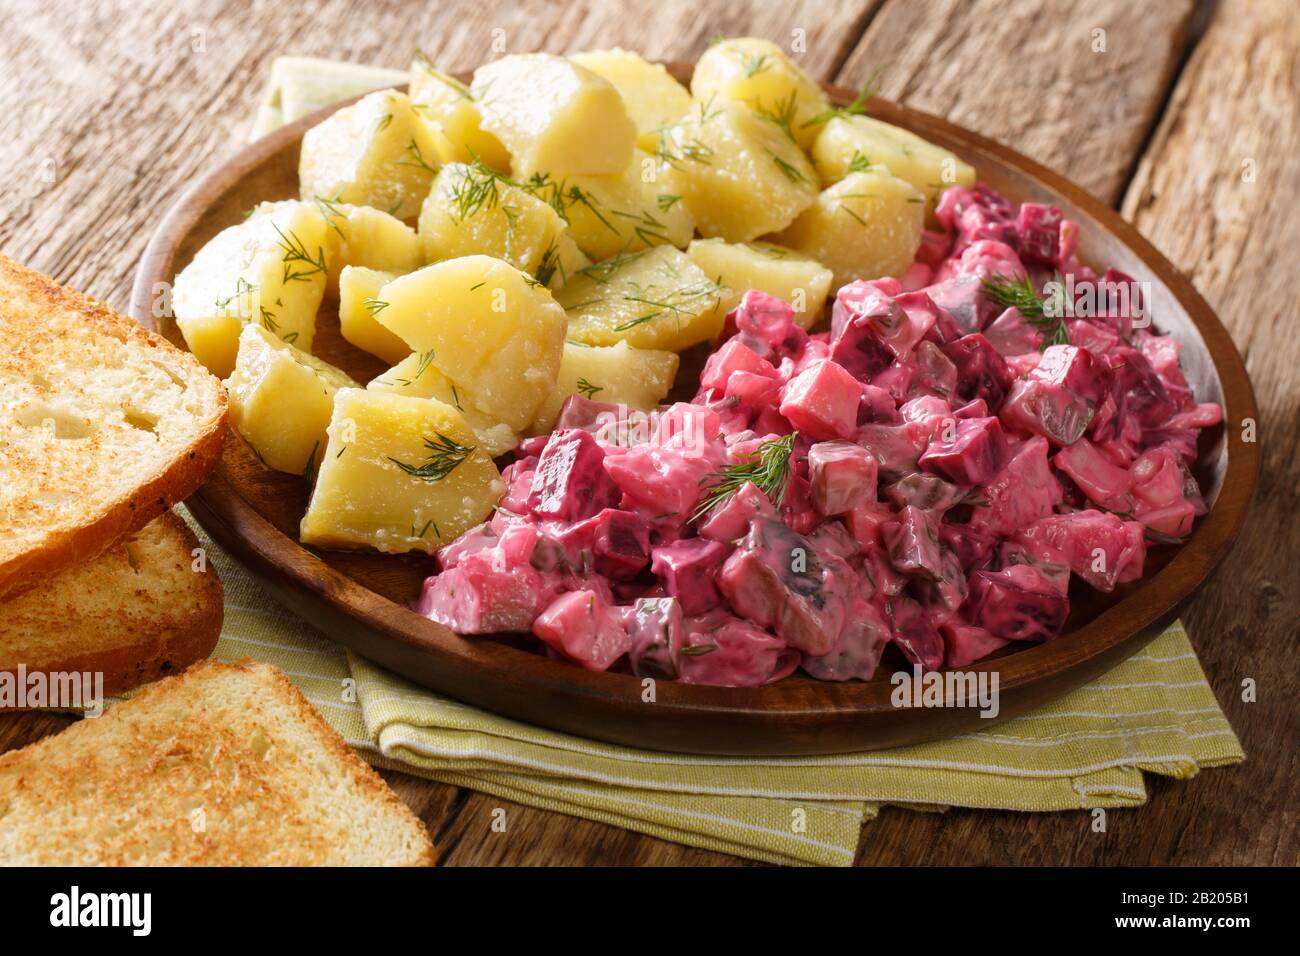 Serving herring salad with vegetables and a side dish of boiled potatoes close-up in a plate on the table. horizontal Stock Photo